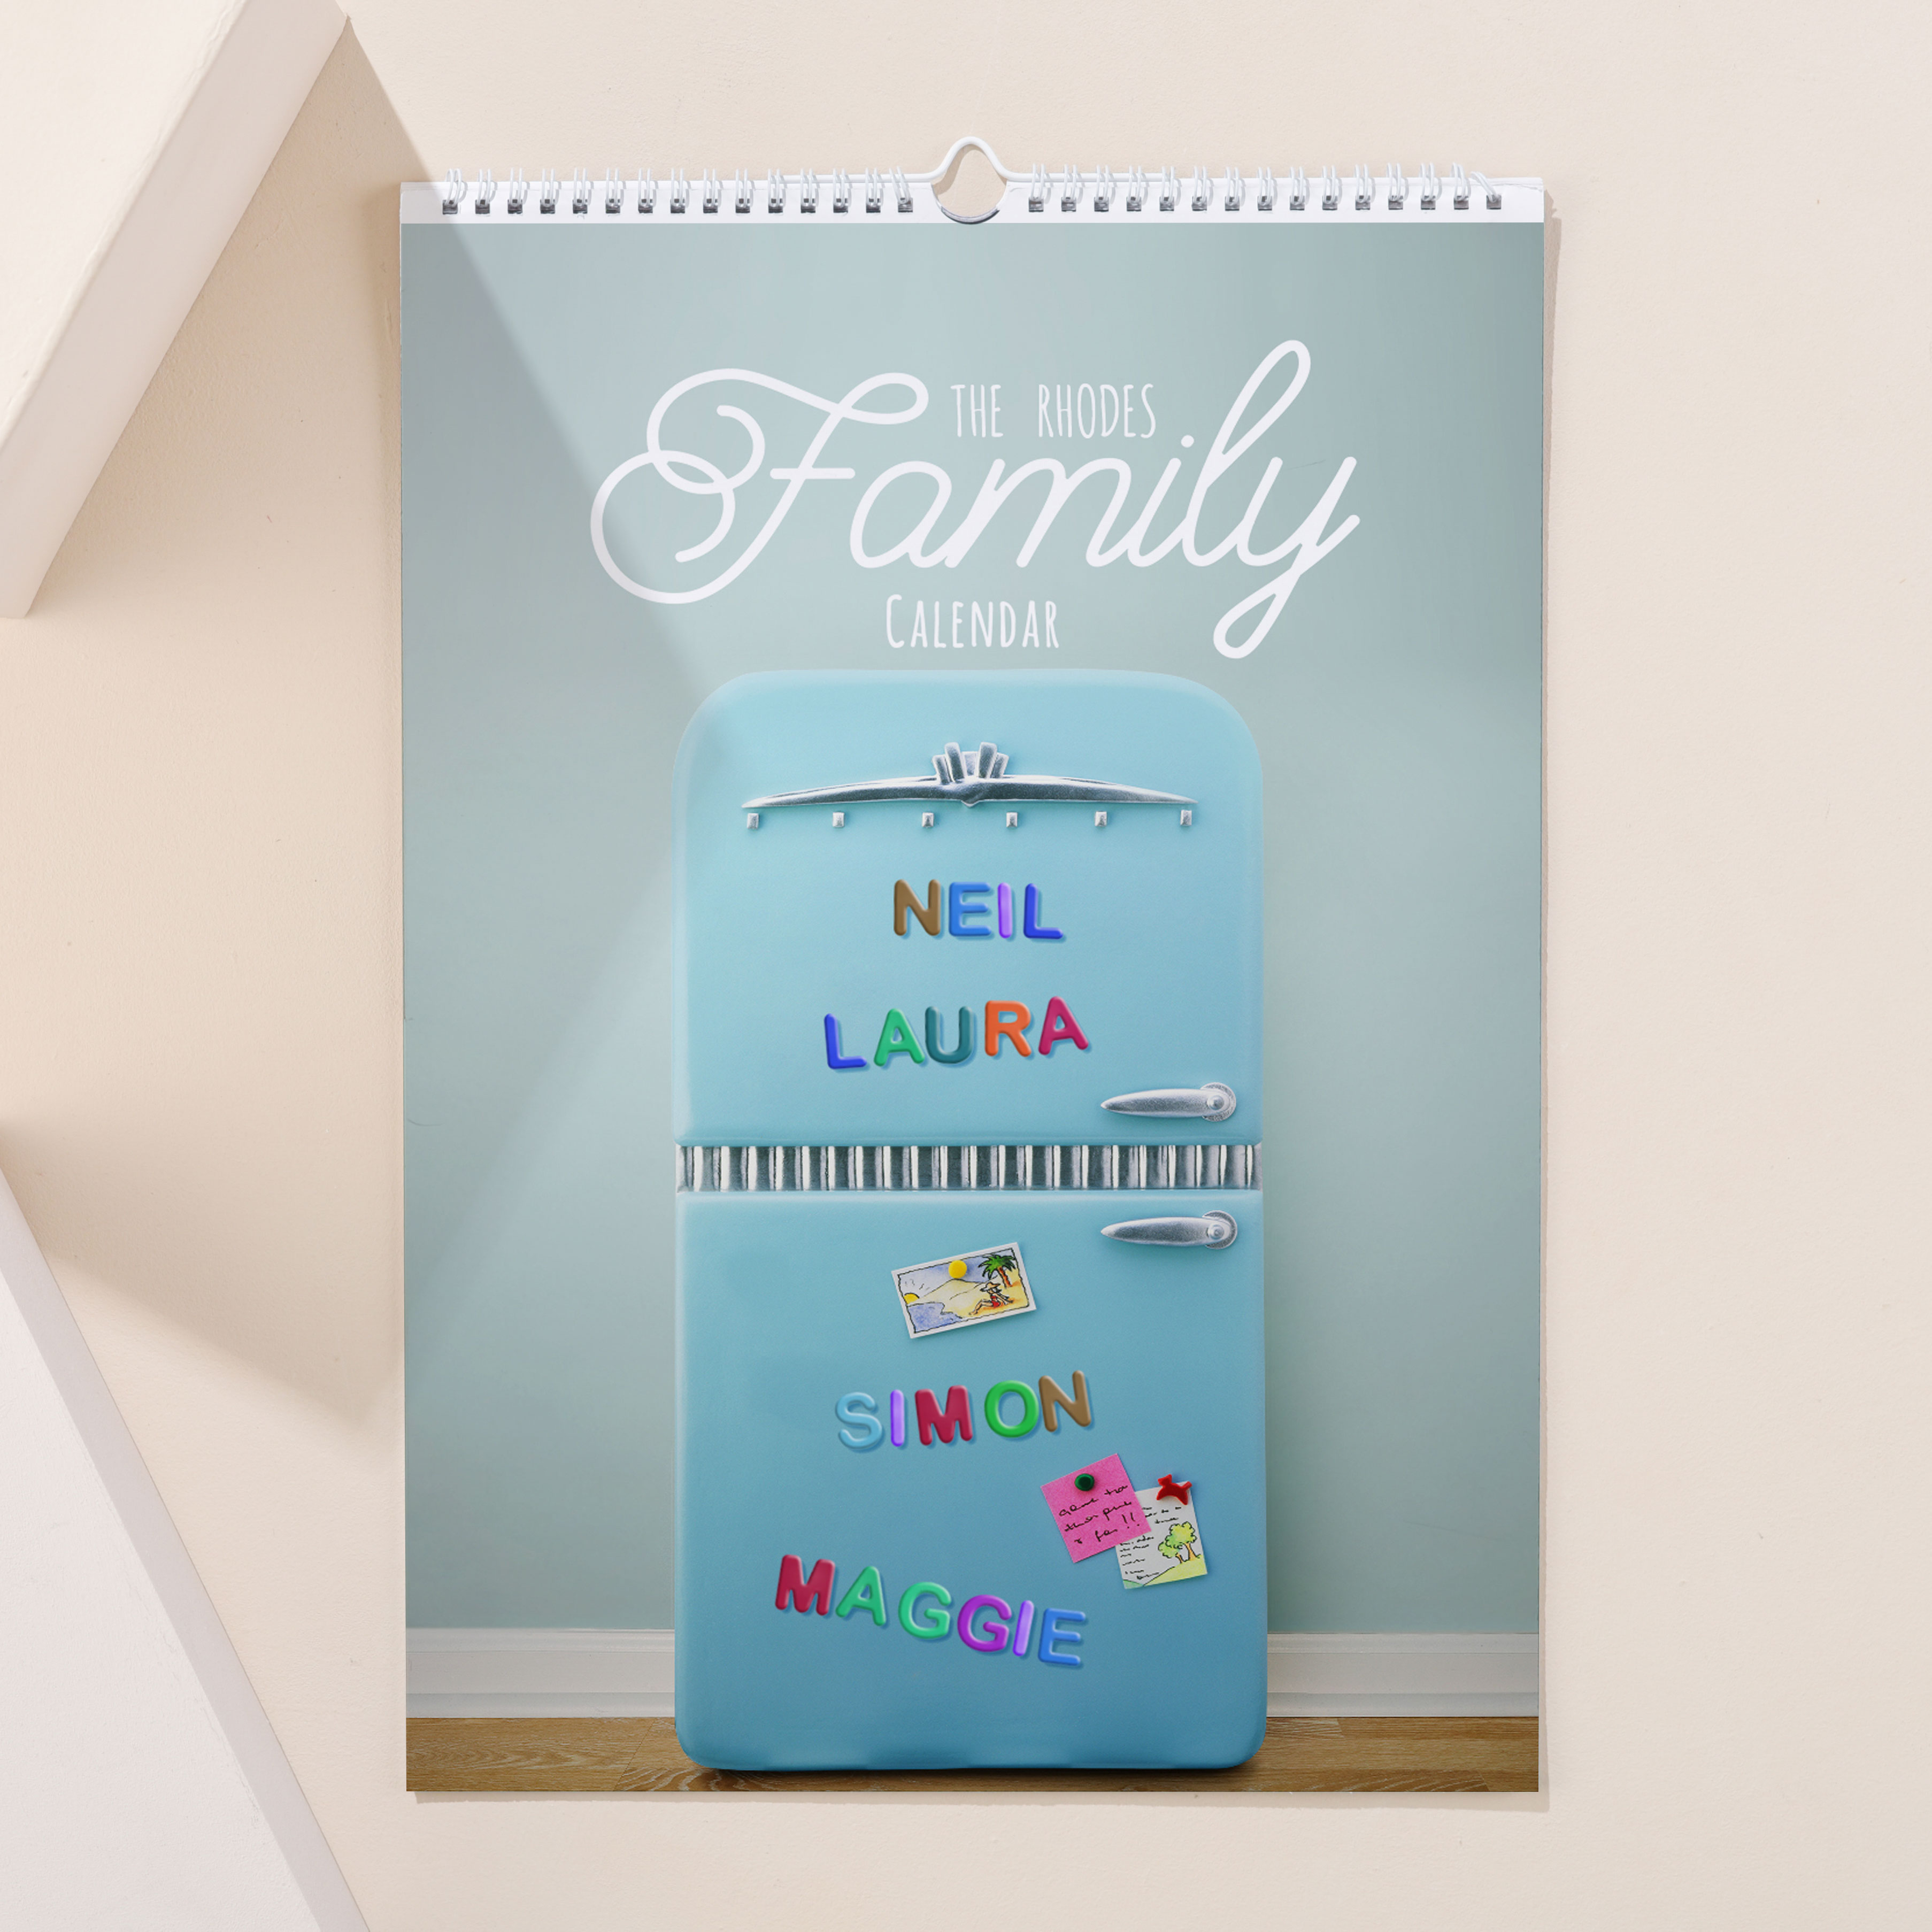 Personalised A3 Planner Calendar - Our Family, 9th Edition